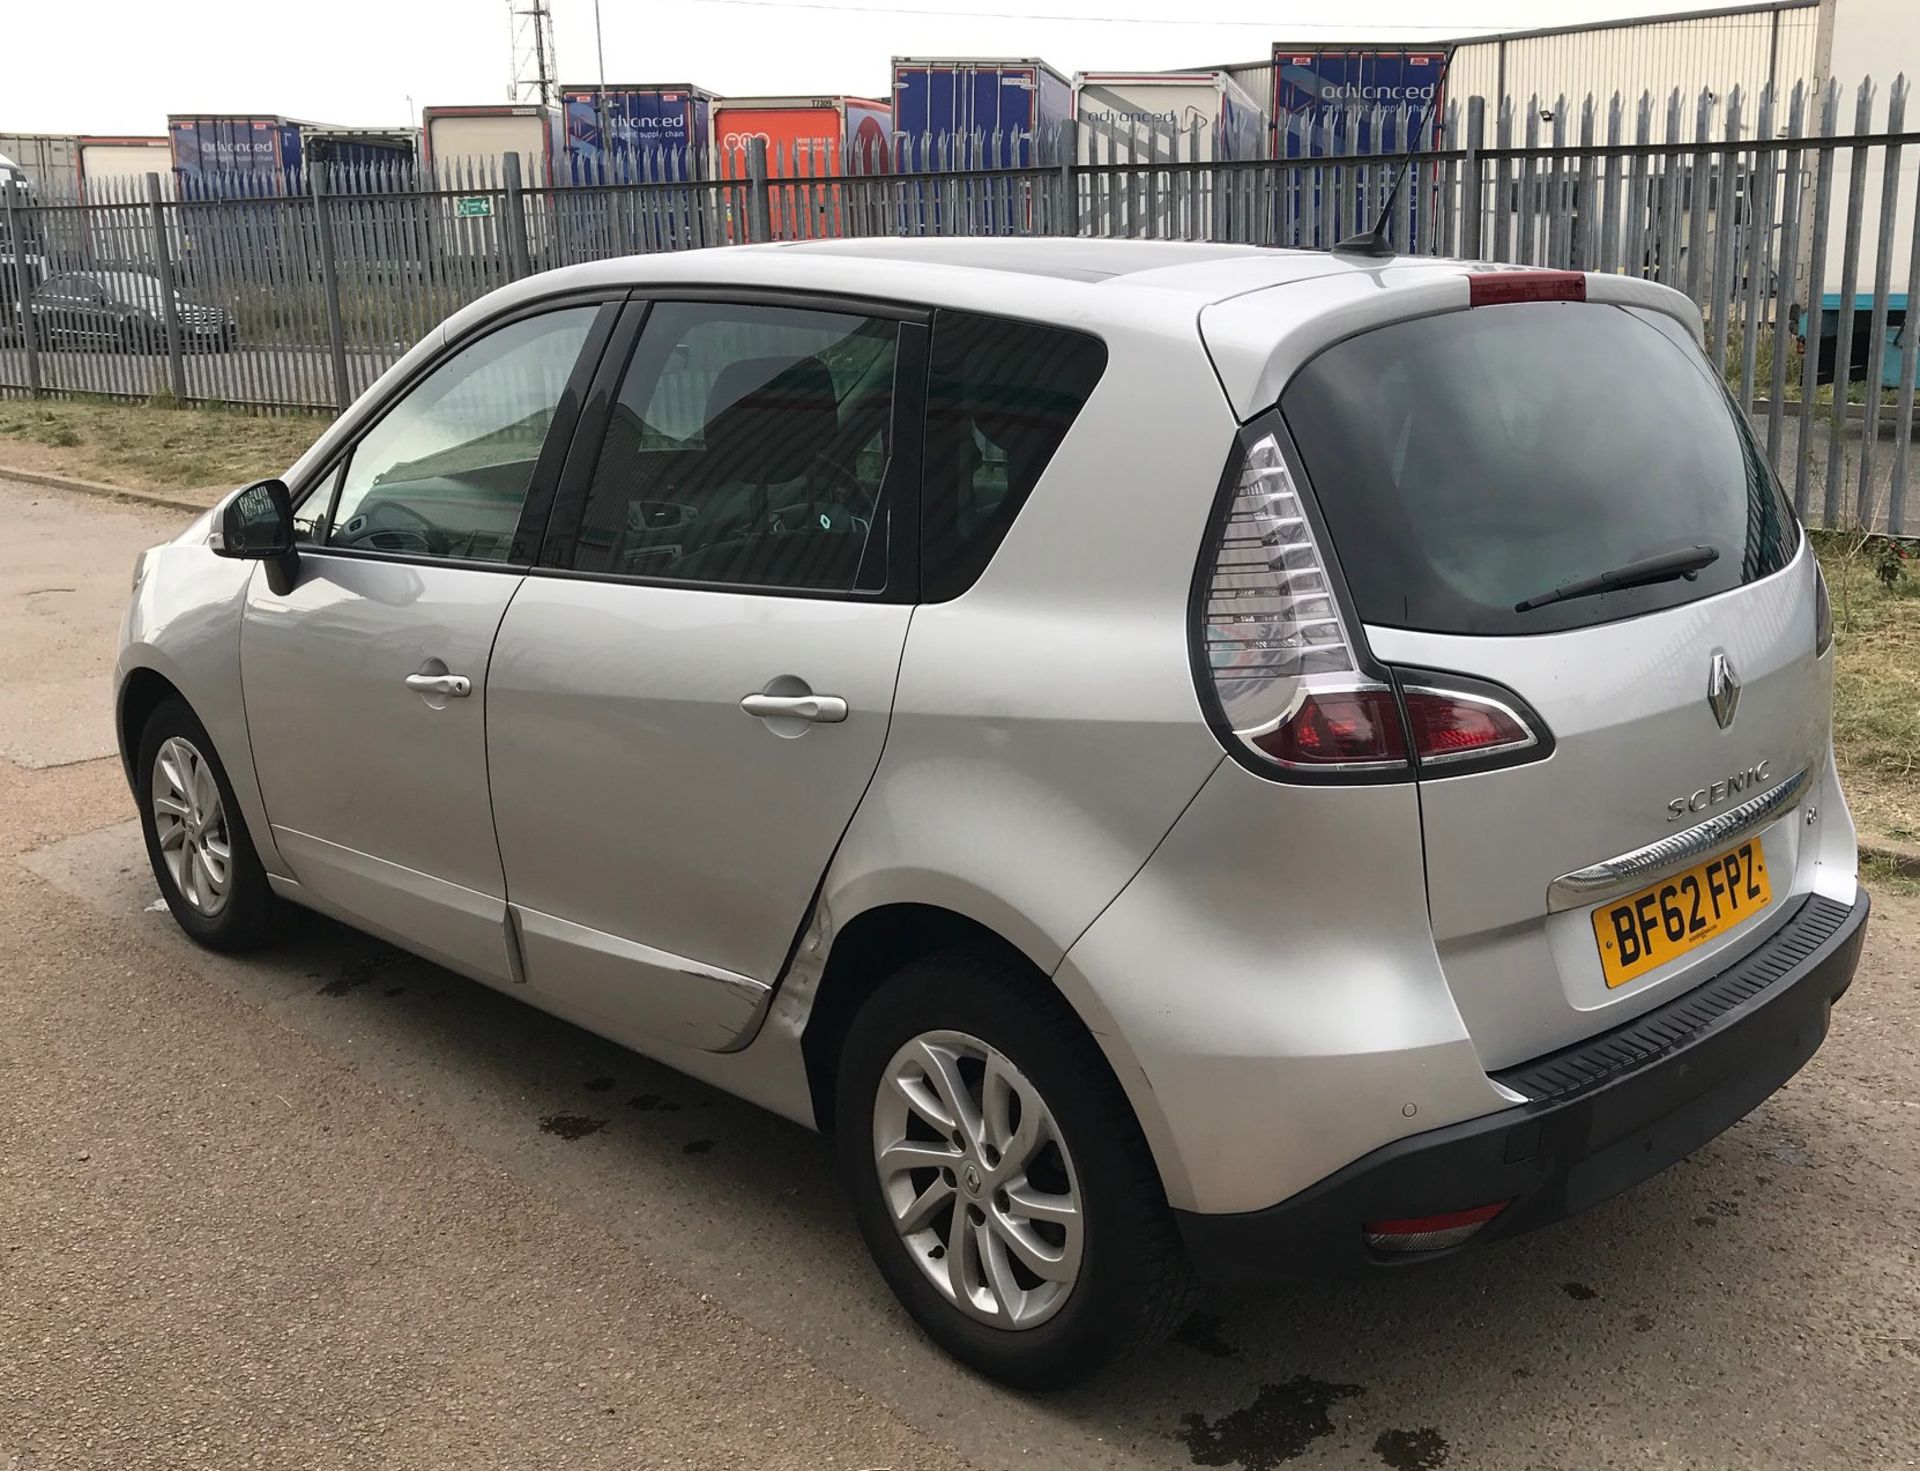 2012 Renault Scenic 1.5 Dci D-Que Tt Energy 5 Dr MPV - CL505 - NO VAT ON THE HAMMER - Location: Corb - Image 5 of 15